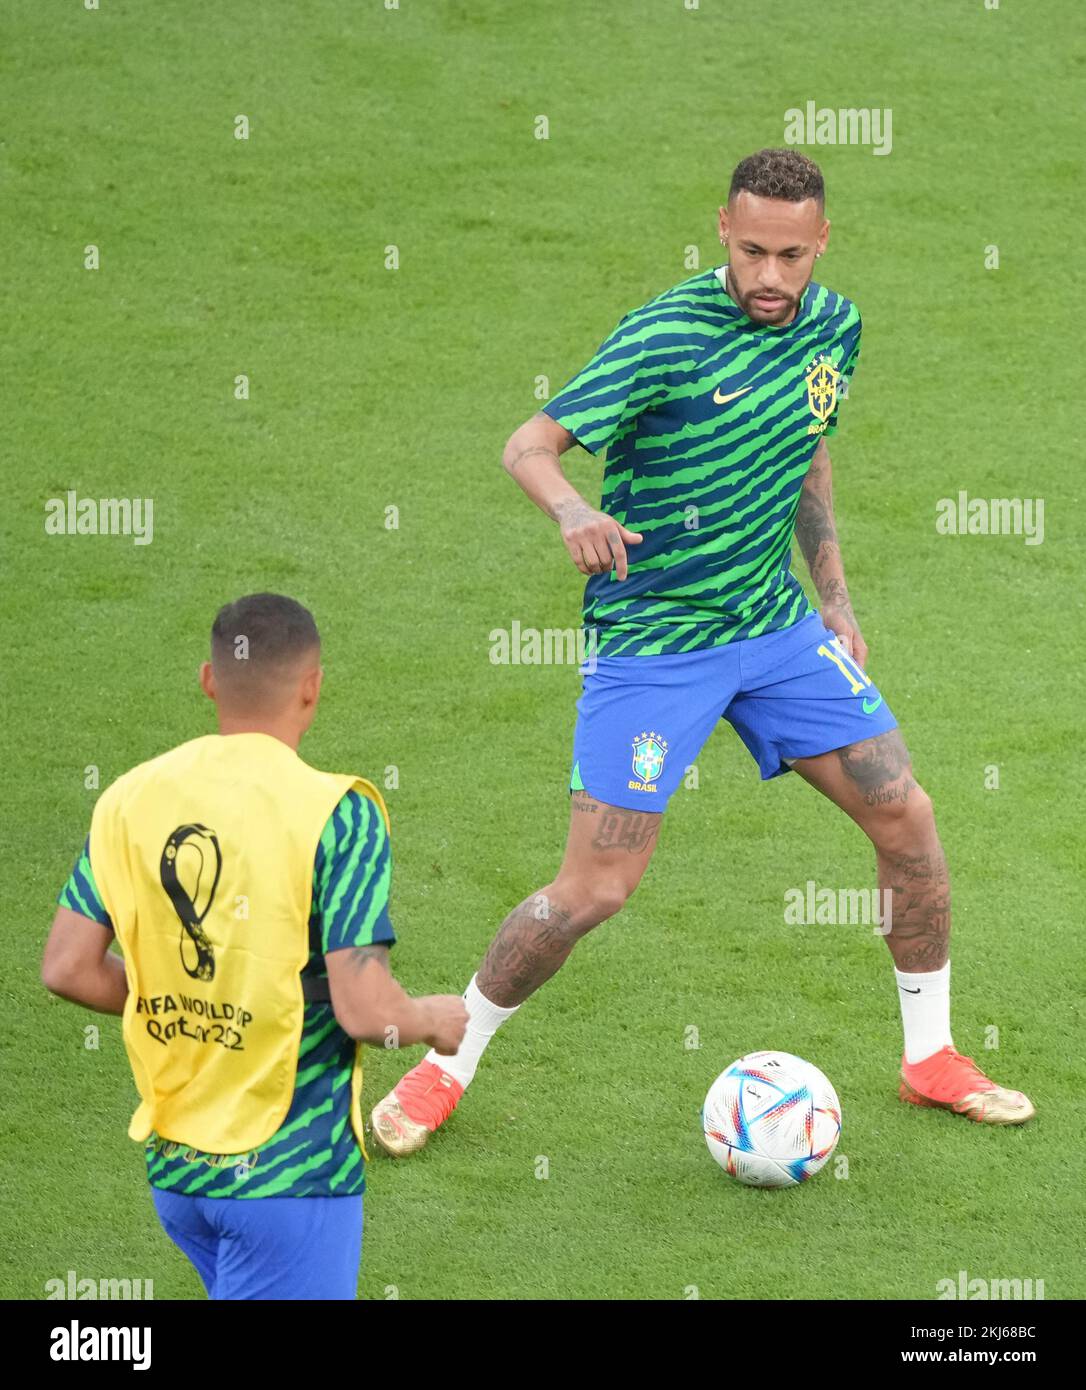 Lusail, Qatar. 24th Nov, 2022. Neymar (R) of Brazil warms up before the Group G match between Brazil and Serbia at the 2022 FIFA World Cup at Lusail Stadium in Lusail, Qatar, Nov. 24, 2022. Credit: Ding Xu/Xinhua/Alamy Live News Stock Photo